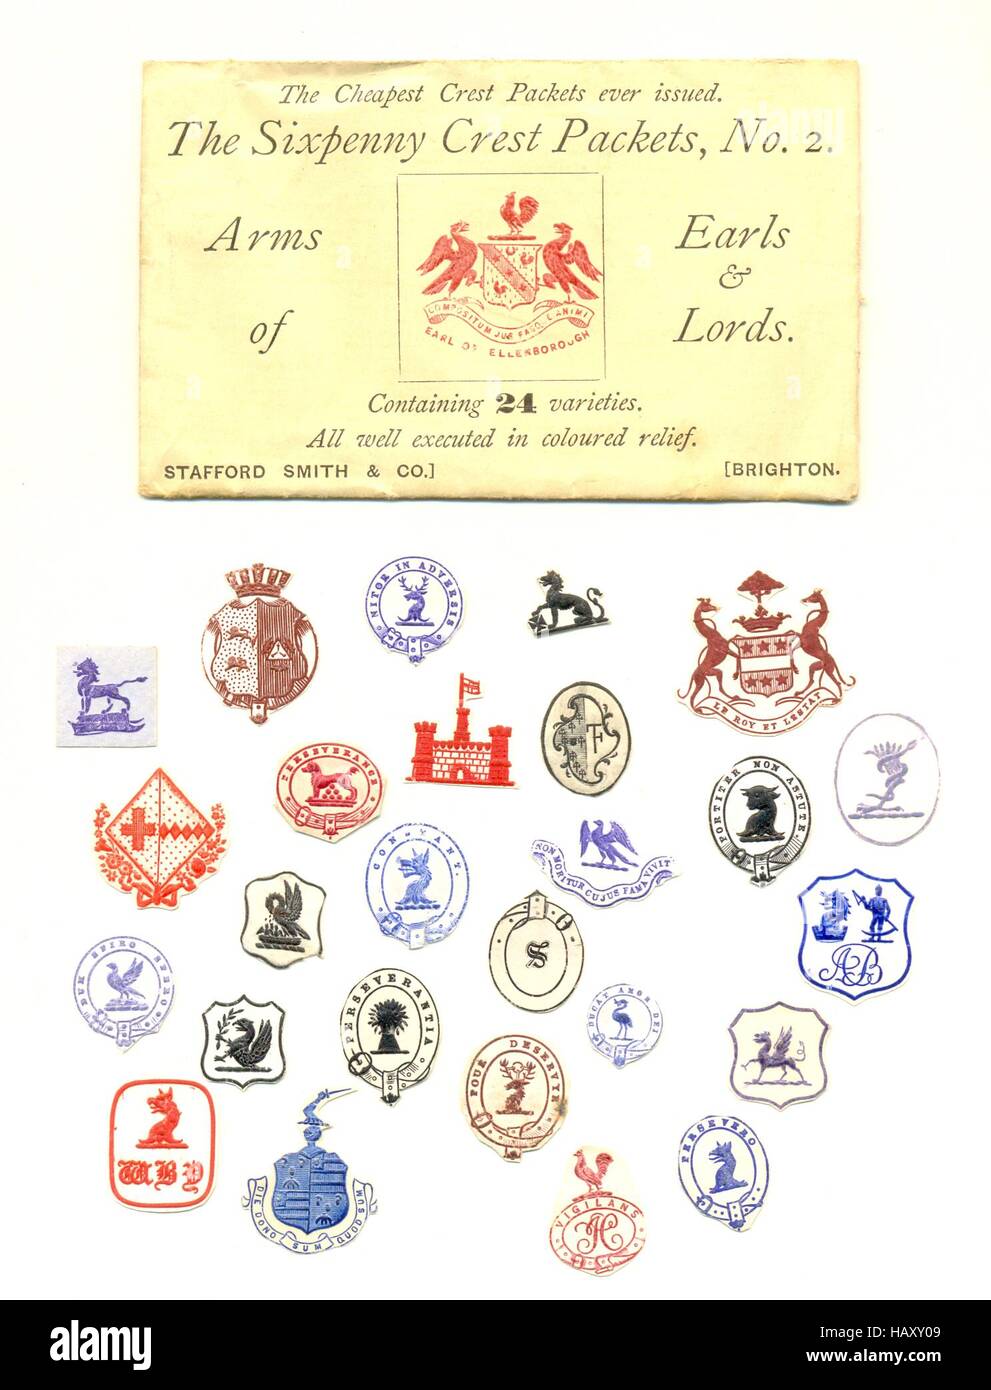 Sixpenny Crest Packet containing coloured relief crests of Arms of Earls & Lords Stock Photo